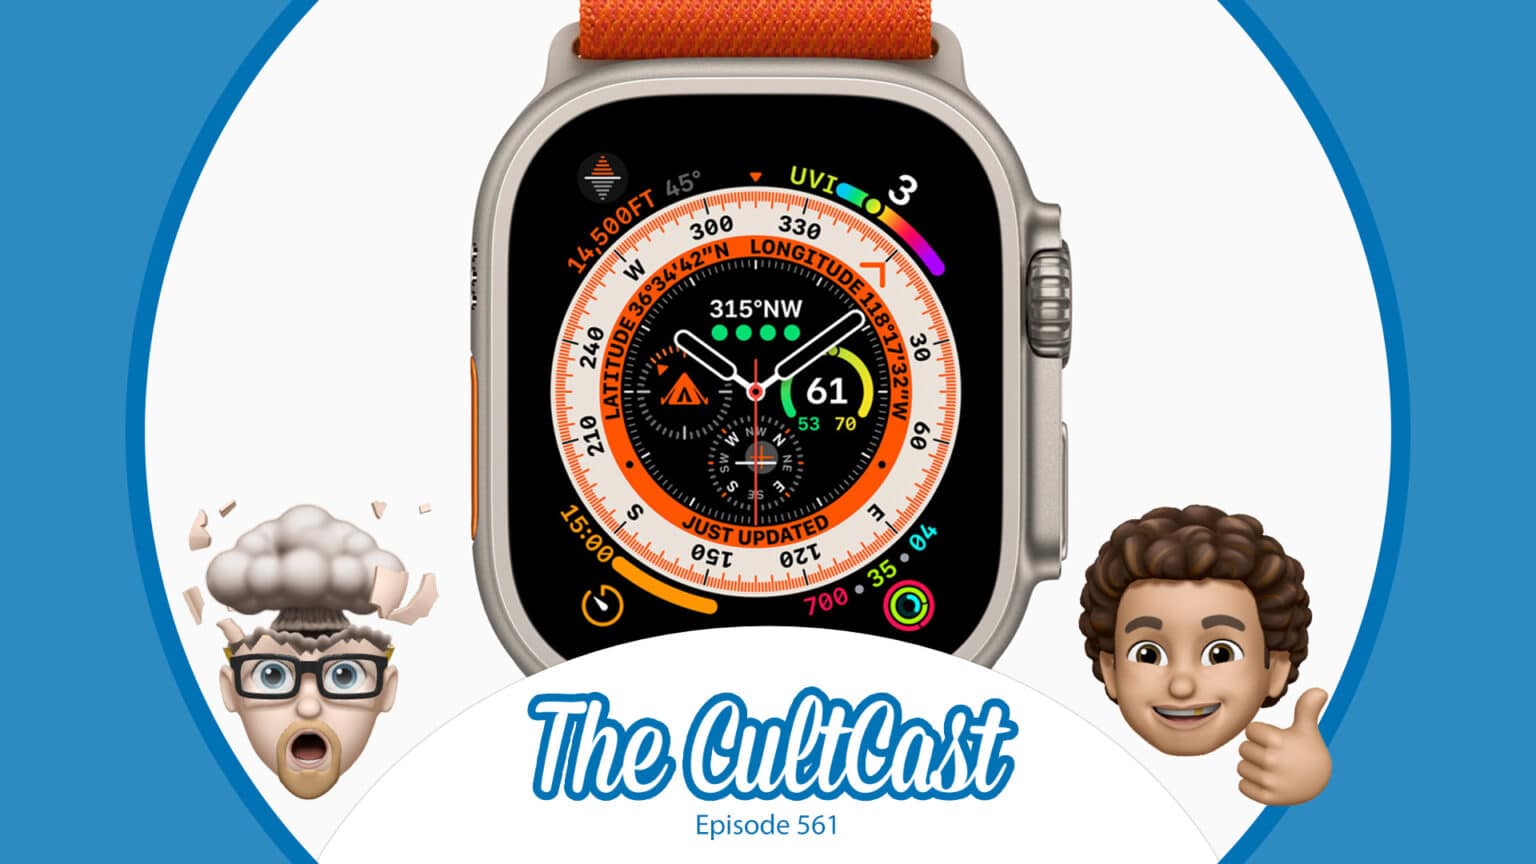 Far Out event discussion Apple podcast The CultCast: Apple Watch Ultra and the Dynamic Island stole the show at the Far Out event.